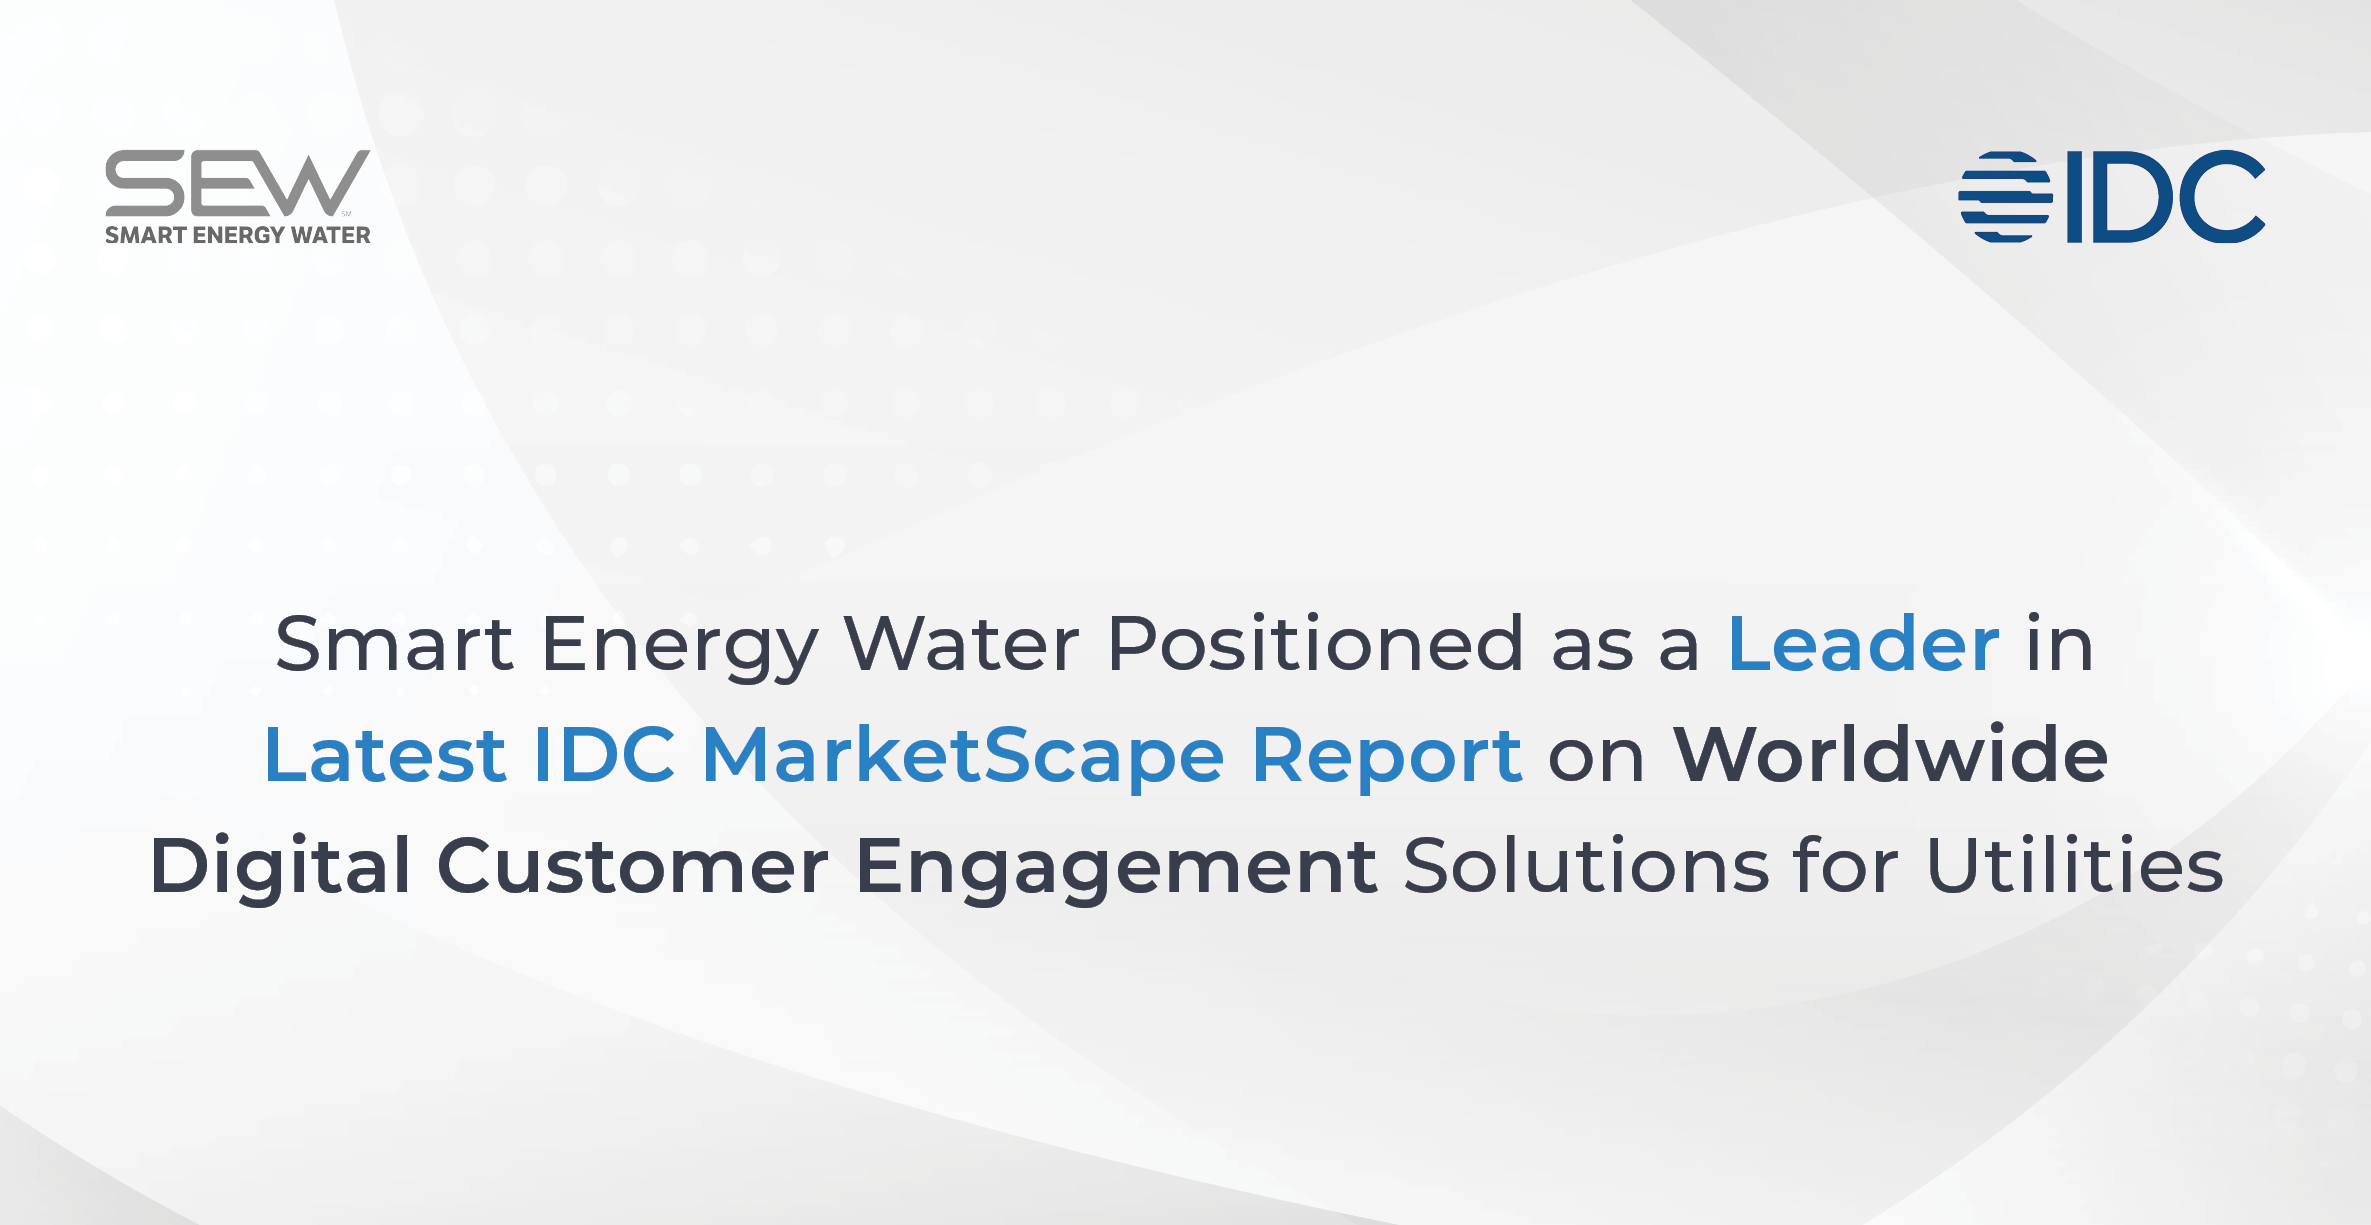 Smart Energy Water Positioned as a Leader in Latest IDC Marketspaces Report on Worldwide Digital Customer Engagement Solutions for Utilities